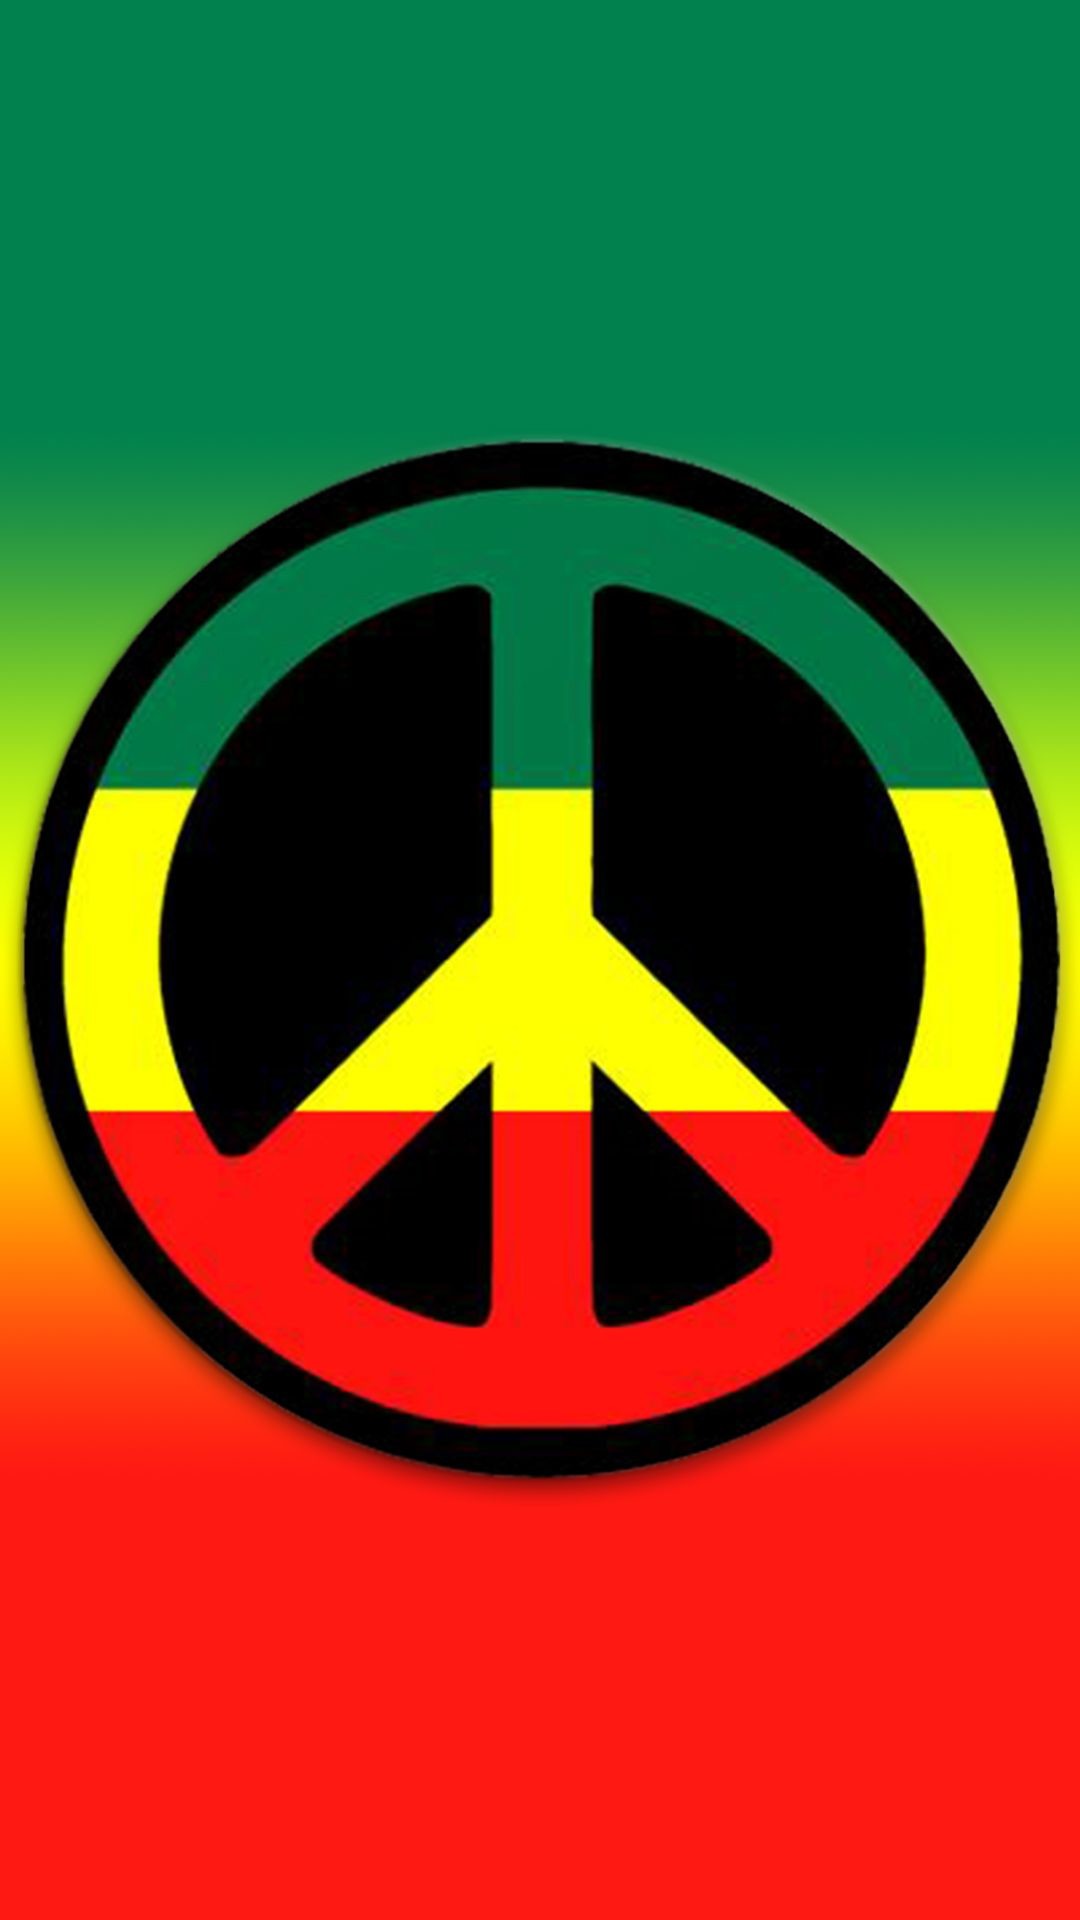 1080x1920, Love And Peace Wallpaper Data Id 176250 - Peace Sign Rasta  Colors - 1080x1920 Wallpaper 